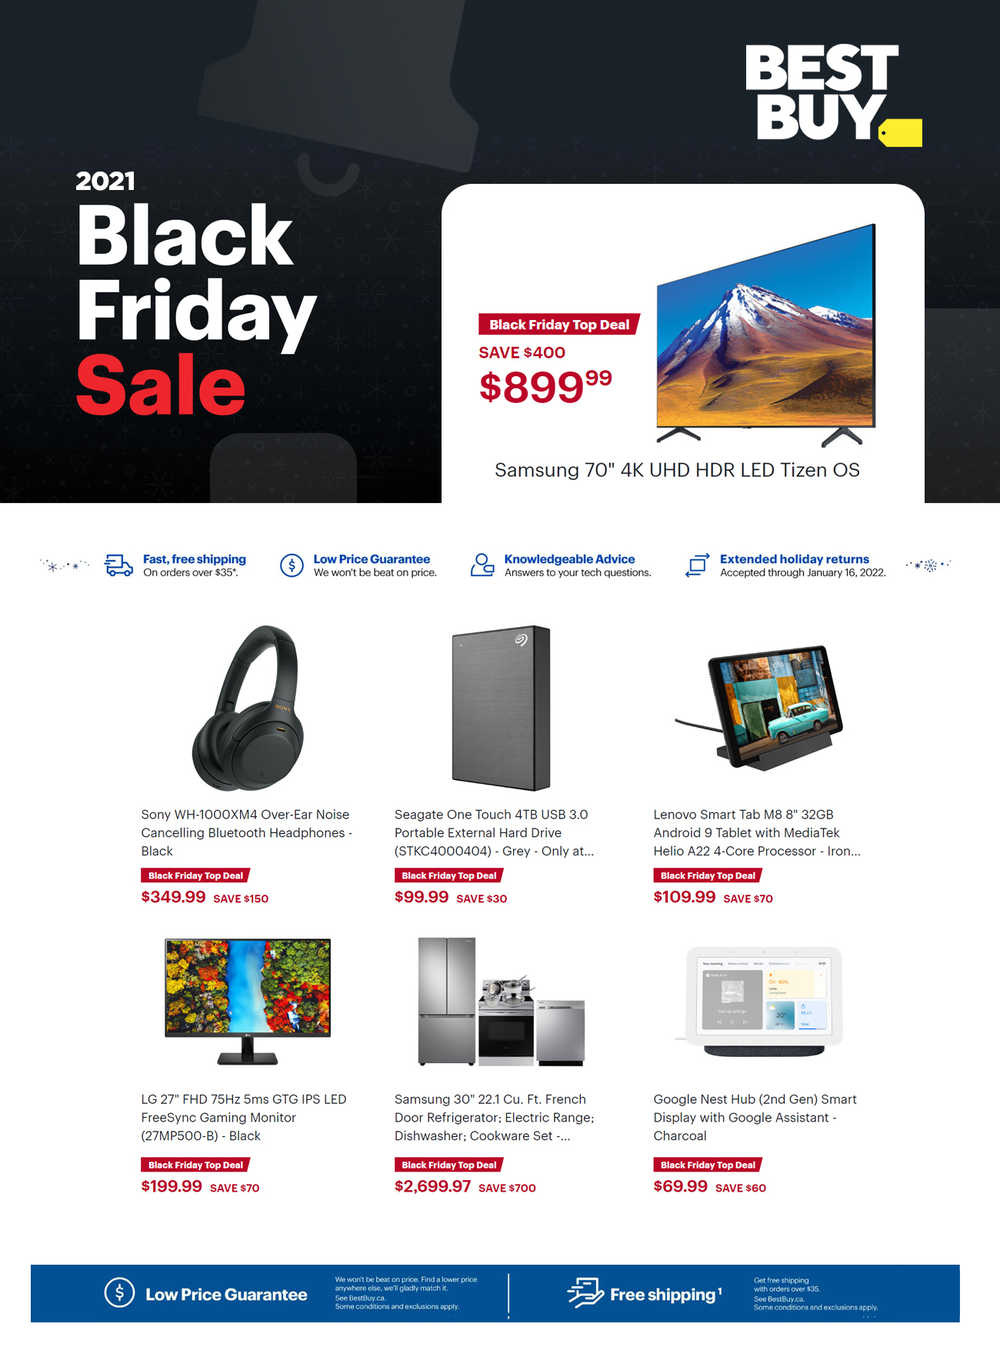 Best selling products on Best buy - Canada